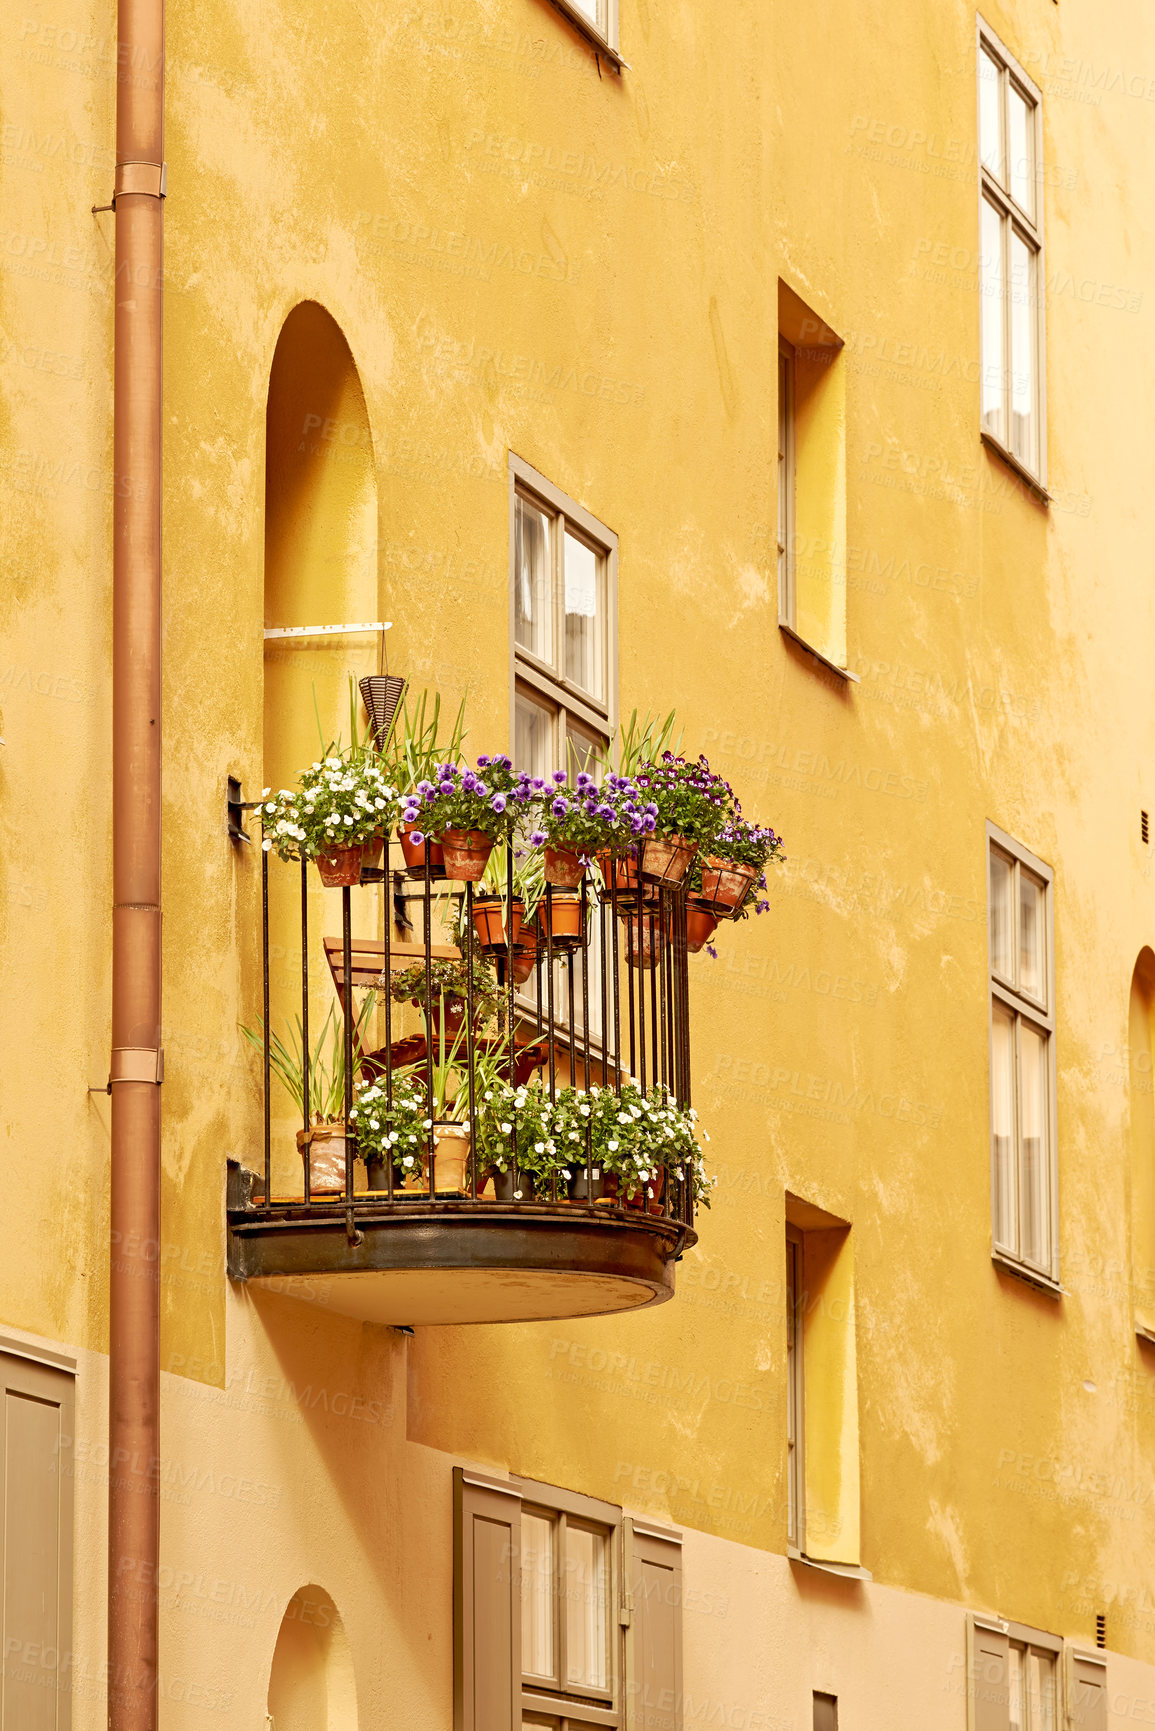 Buy stock photo A small flower-decorated balcony on an old building in Old town, Stockholm